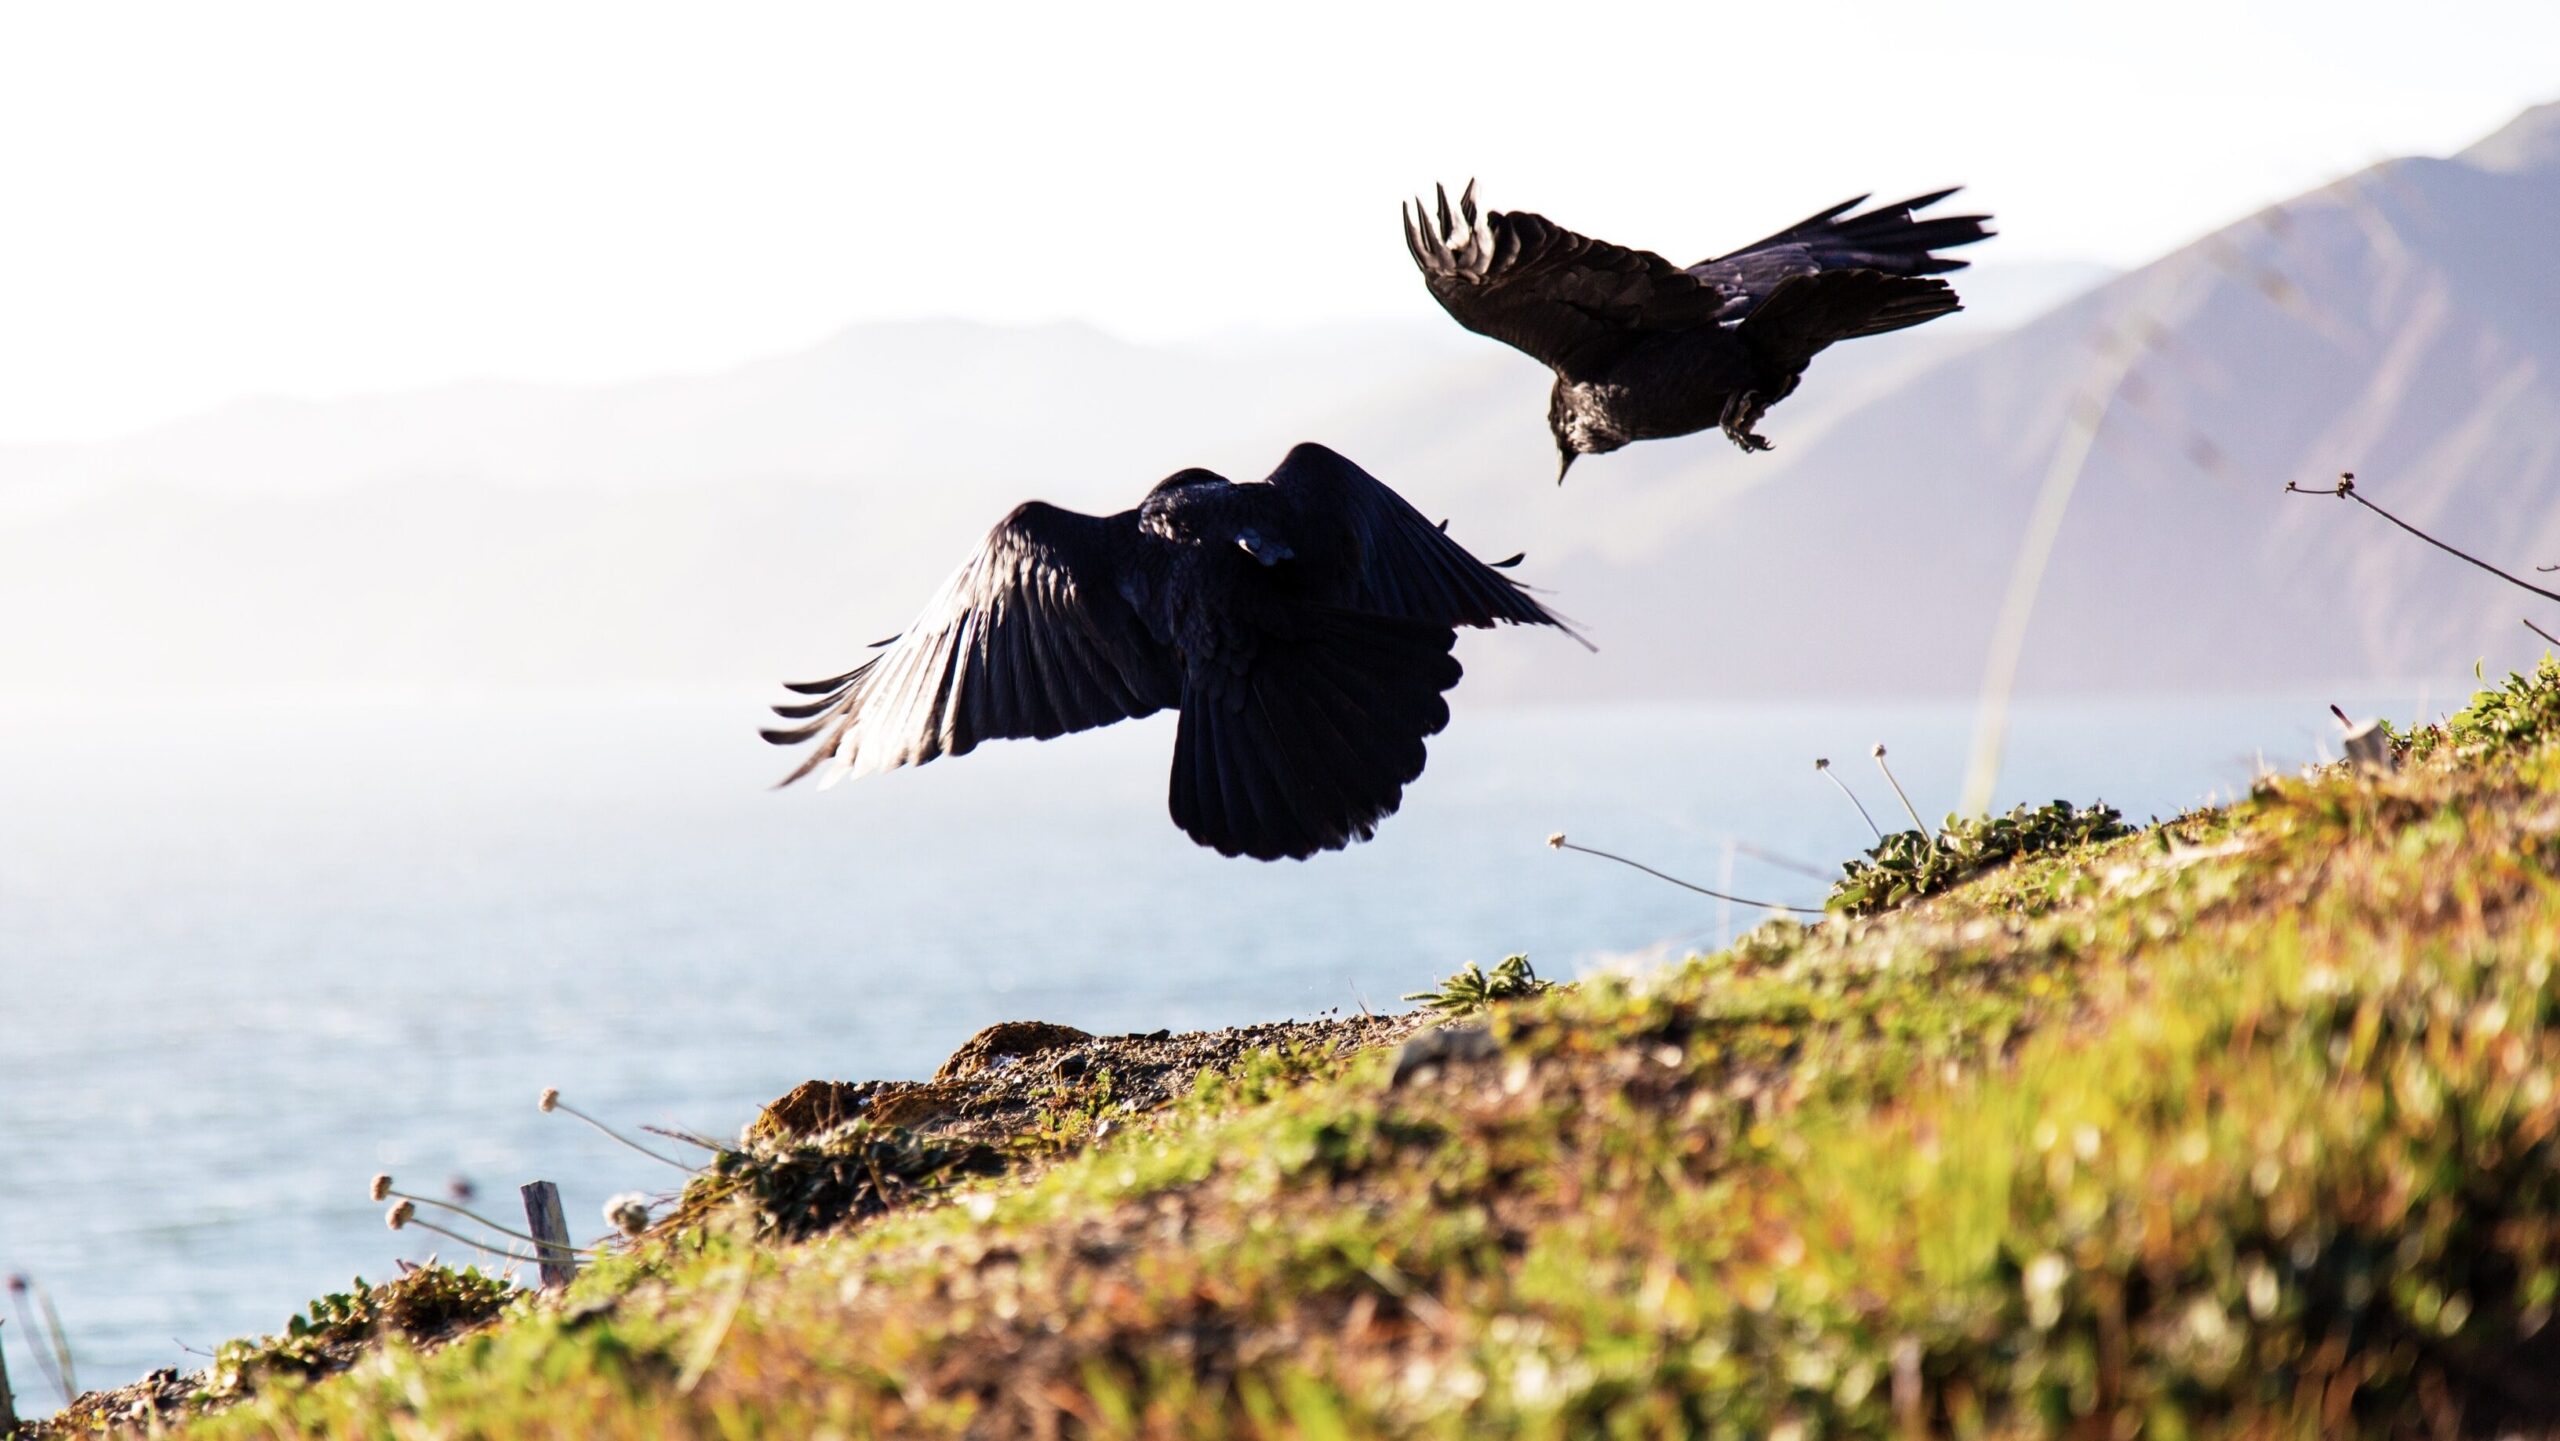 Two black birds flying over a grassy area